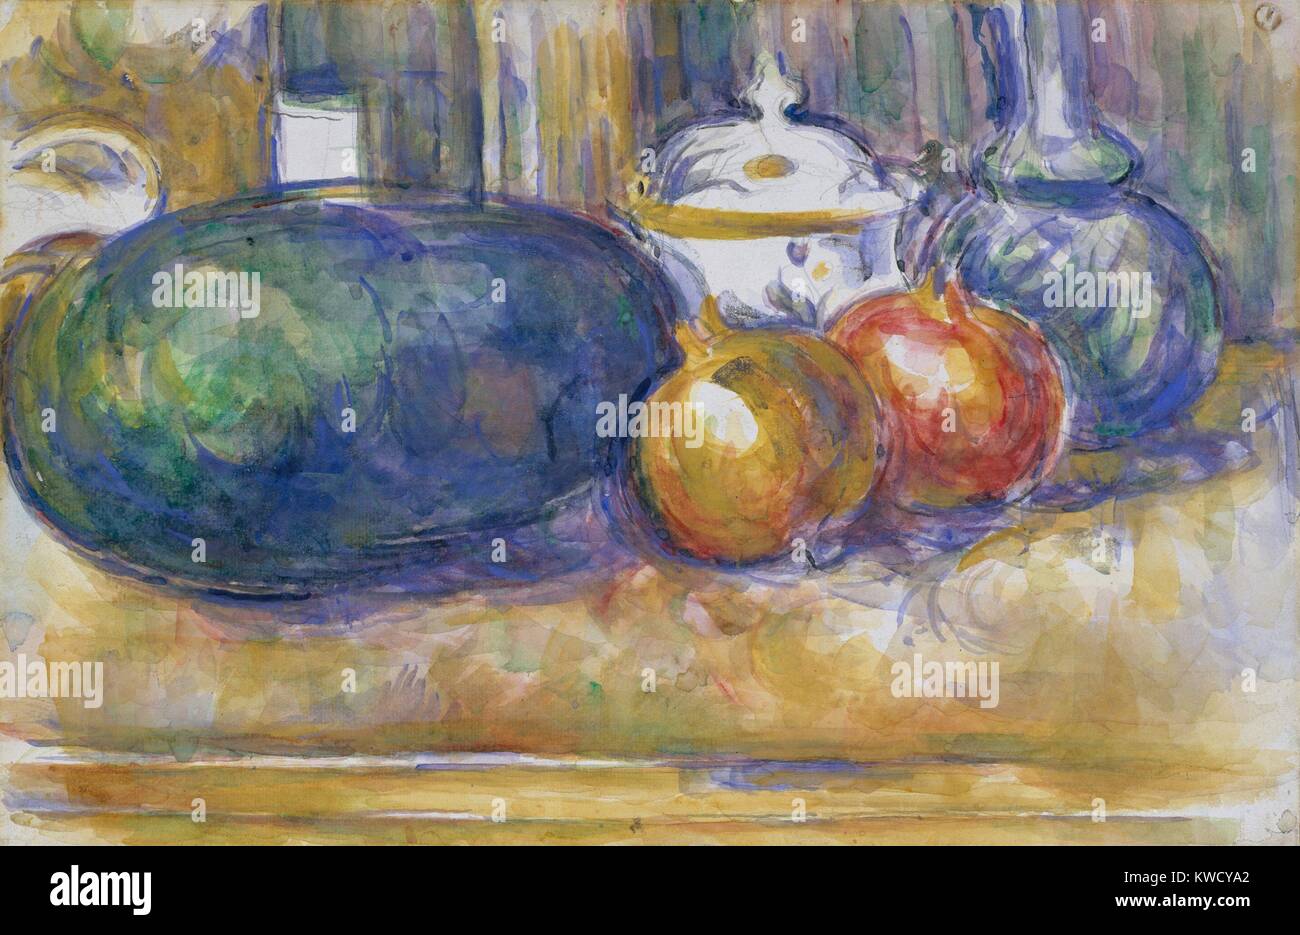 Still-Life with a Watermelon and Pomegranates, by Paul Cezanne, 1900-06, French Post-Impressionism. Watercolor painting over graphite on paper (BSLOC 2017 5 26) Stock Photo